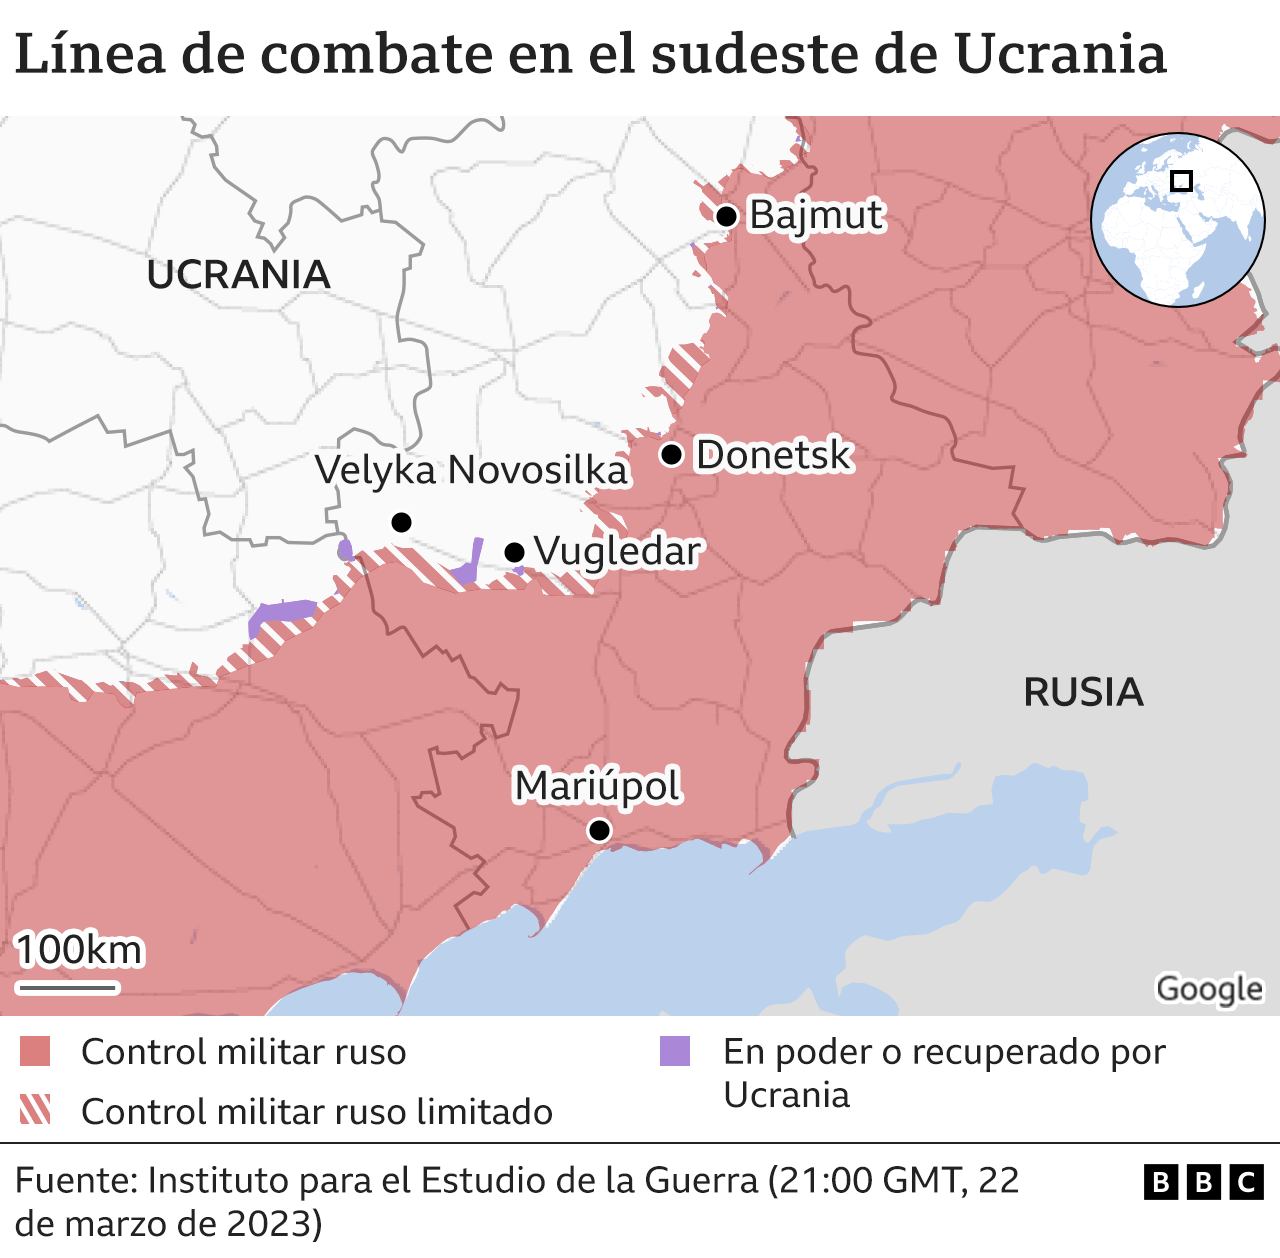 Map of the battle line in south-eastern Ukraine.